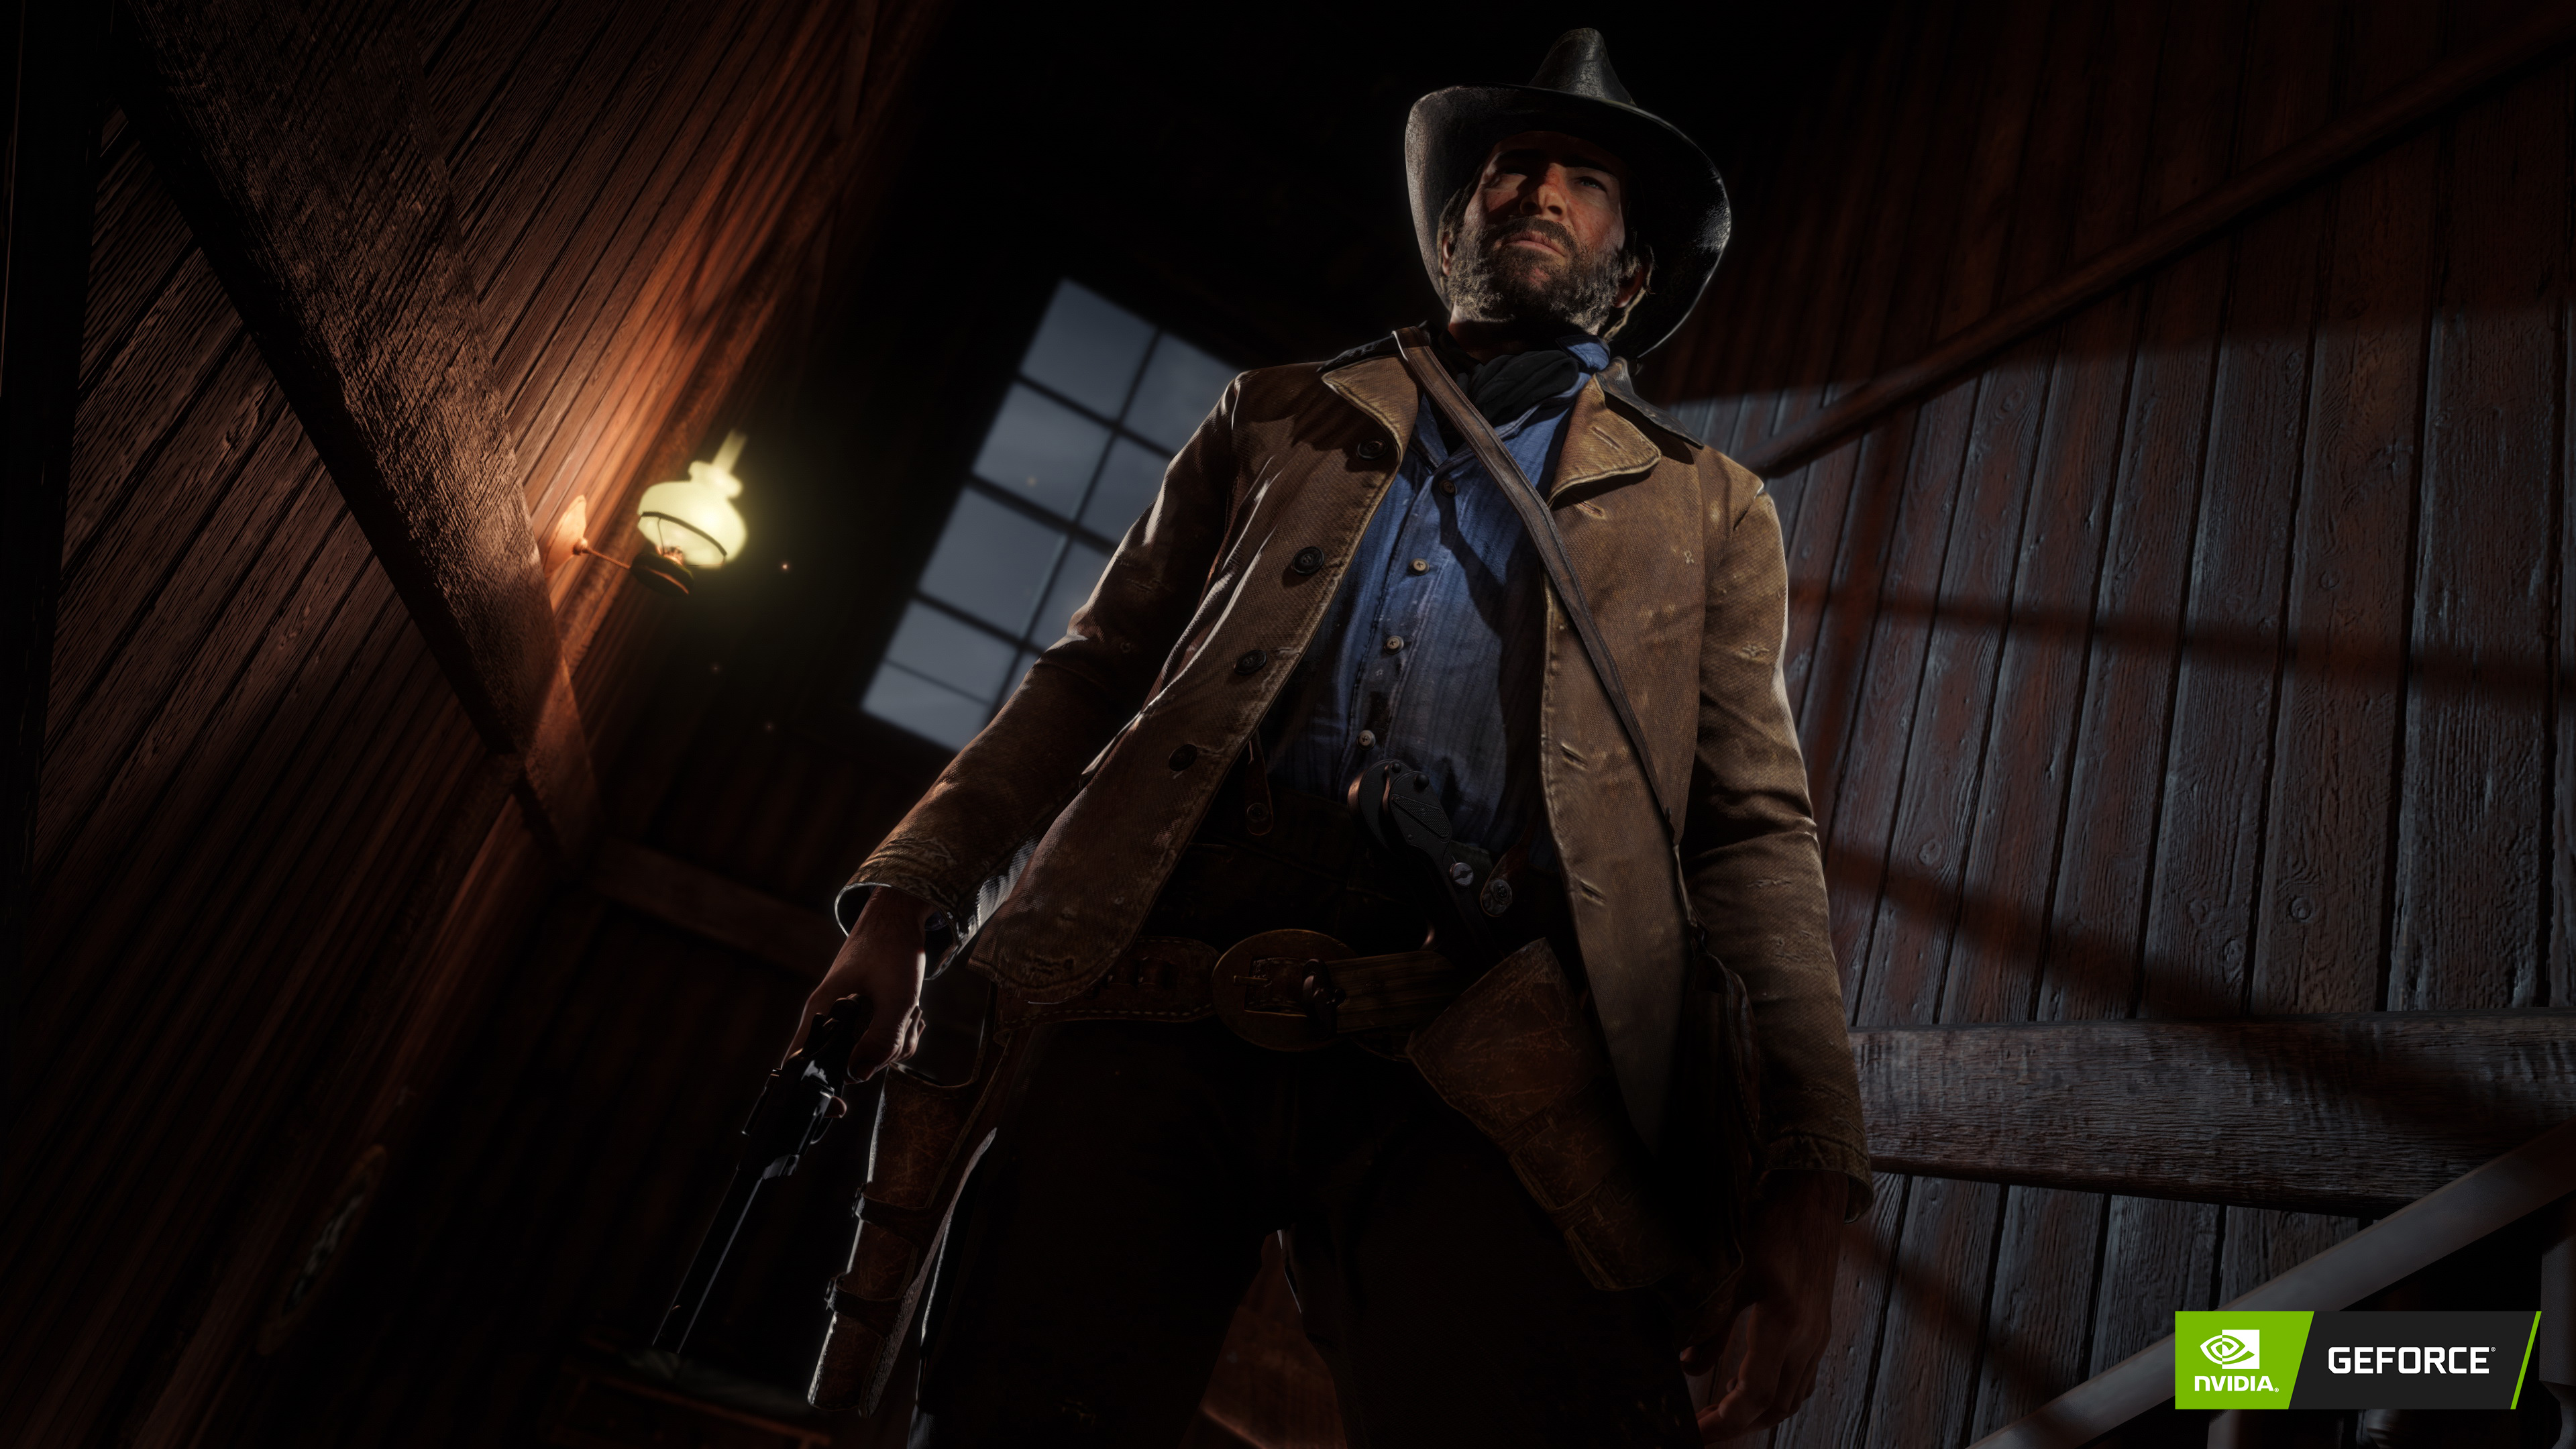 Vurdering Arne linned Red Dead Redemption 2: NVIDIA's Recommended GPUs For 60+ FPS Gameplay